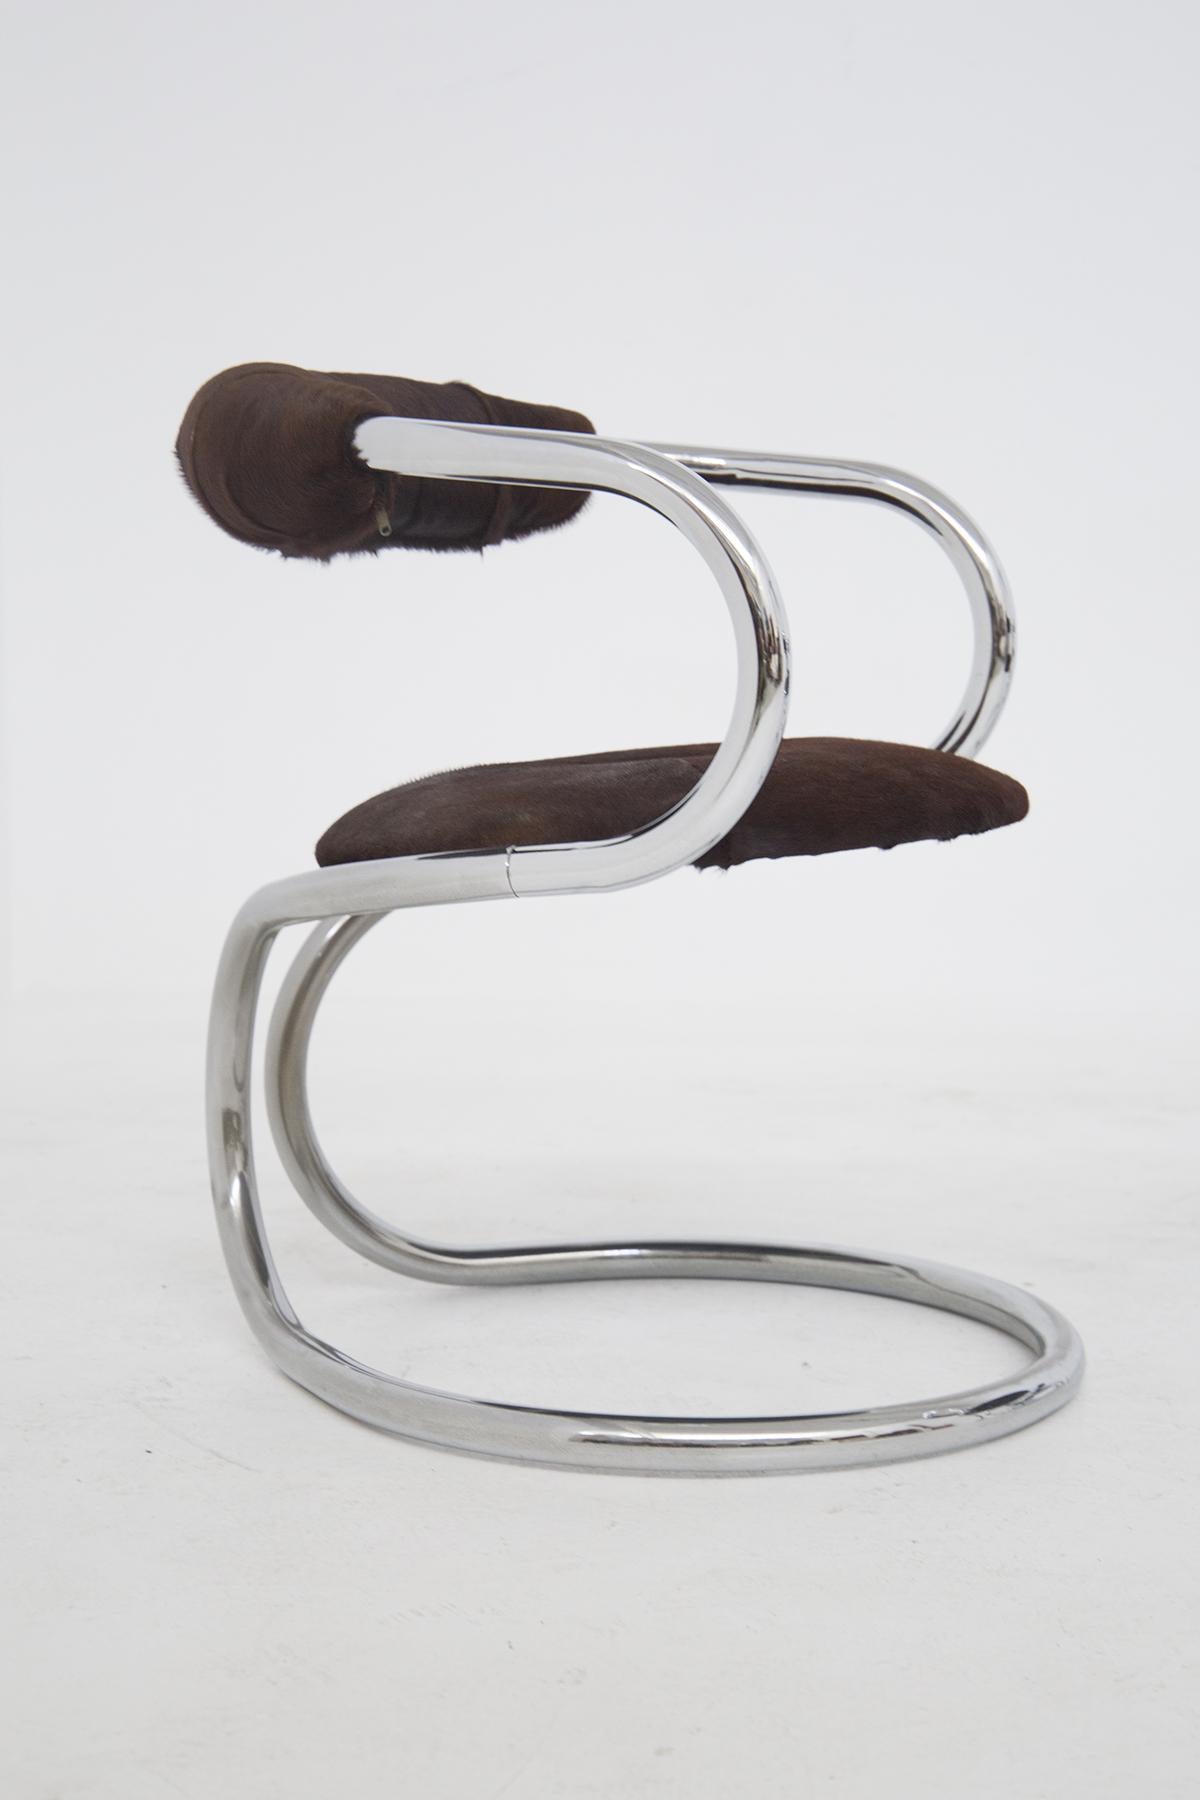 Giotto Stoppino Chairs in Chromed Steel and Pony 2